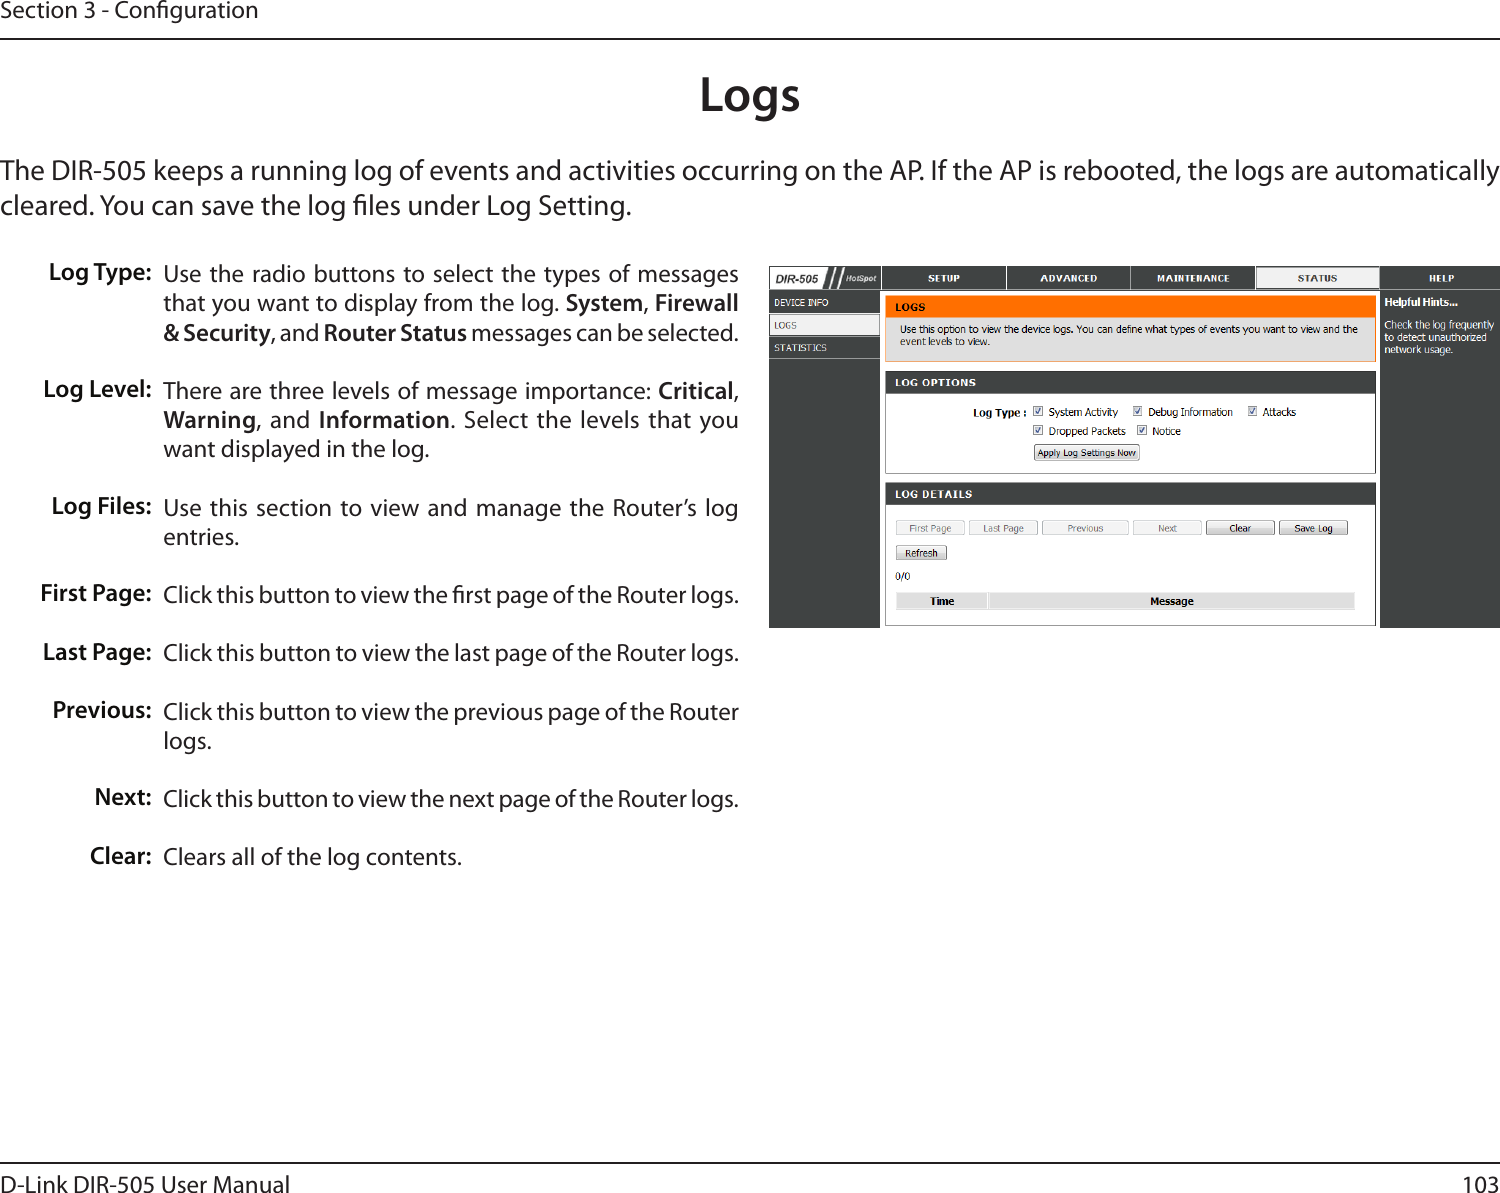 103D-Link DIR-505 User ManualSection 3 - CongurationLogsThe DIR-505 keeps a running log of events and activities occurring on the AP. If the AP is rebooted, the logs are automatically cleared. You can save the log les under Log Setting.Log Type:Log Level:Log Files:First Page:Last Page:Previous:Next:Clear:Use the radio buttons to select the types of messages that you want to display from the log. System, Firewall &amp; Security, and Router Status messages can be selected.There are three levels of message importance: Critical, Warning, and Information. Select the  levels that you want displayed in the log.Use this section to view and manage  the Router’s  log entries.Click this button to view the rst page of the Router logs.Click this button to view the last page of the Router logs. Click this button to view the previous page of the Router logs.Click this button to view the next page of the Router logs. Clears all of the log contents.